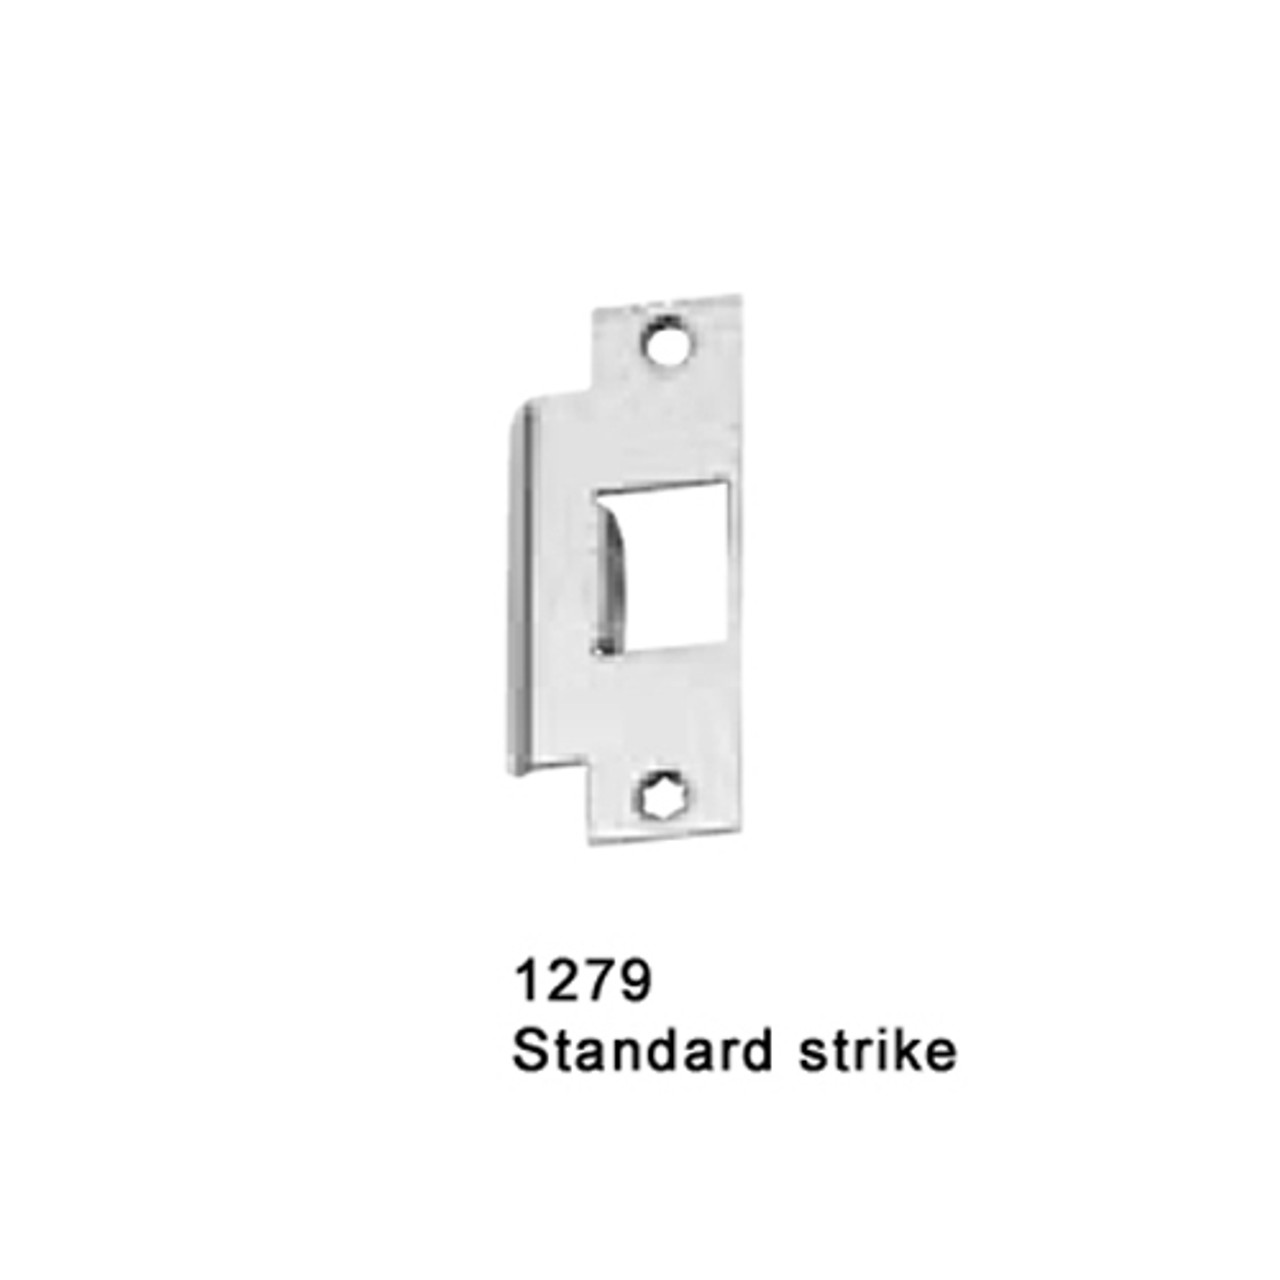 CD25-M-EO-US28-4-RHR Falcon 25 Series Exit Only Mortise Lock Devices in Anodized Aluminum